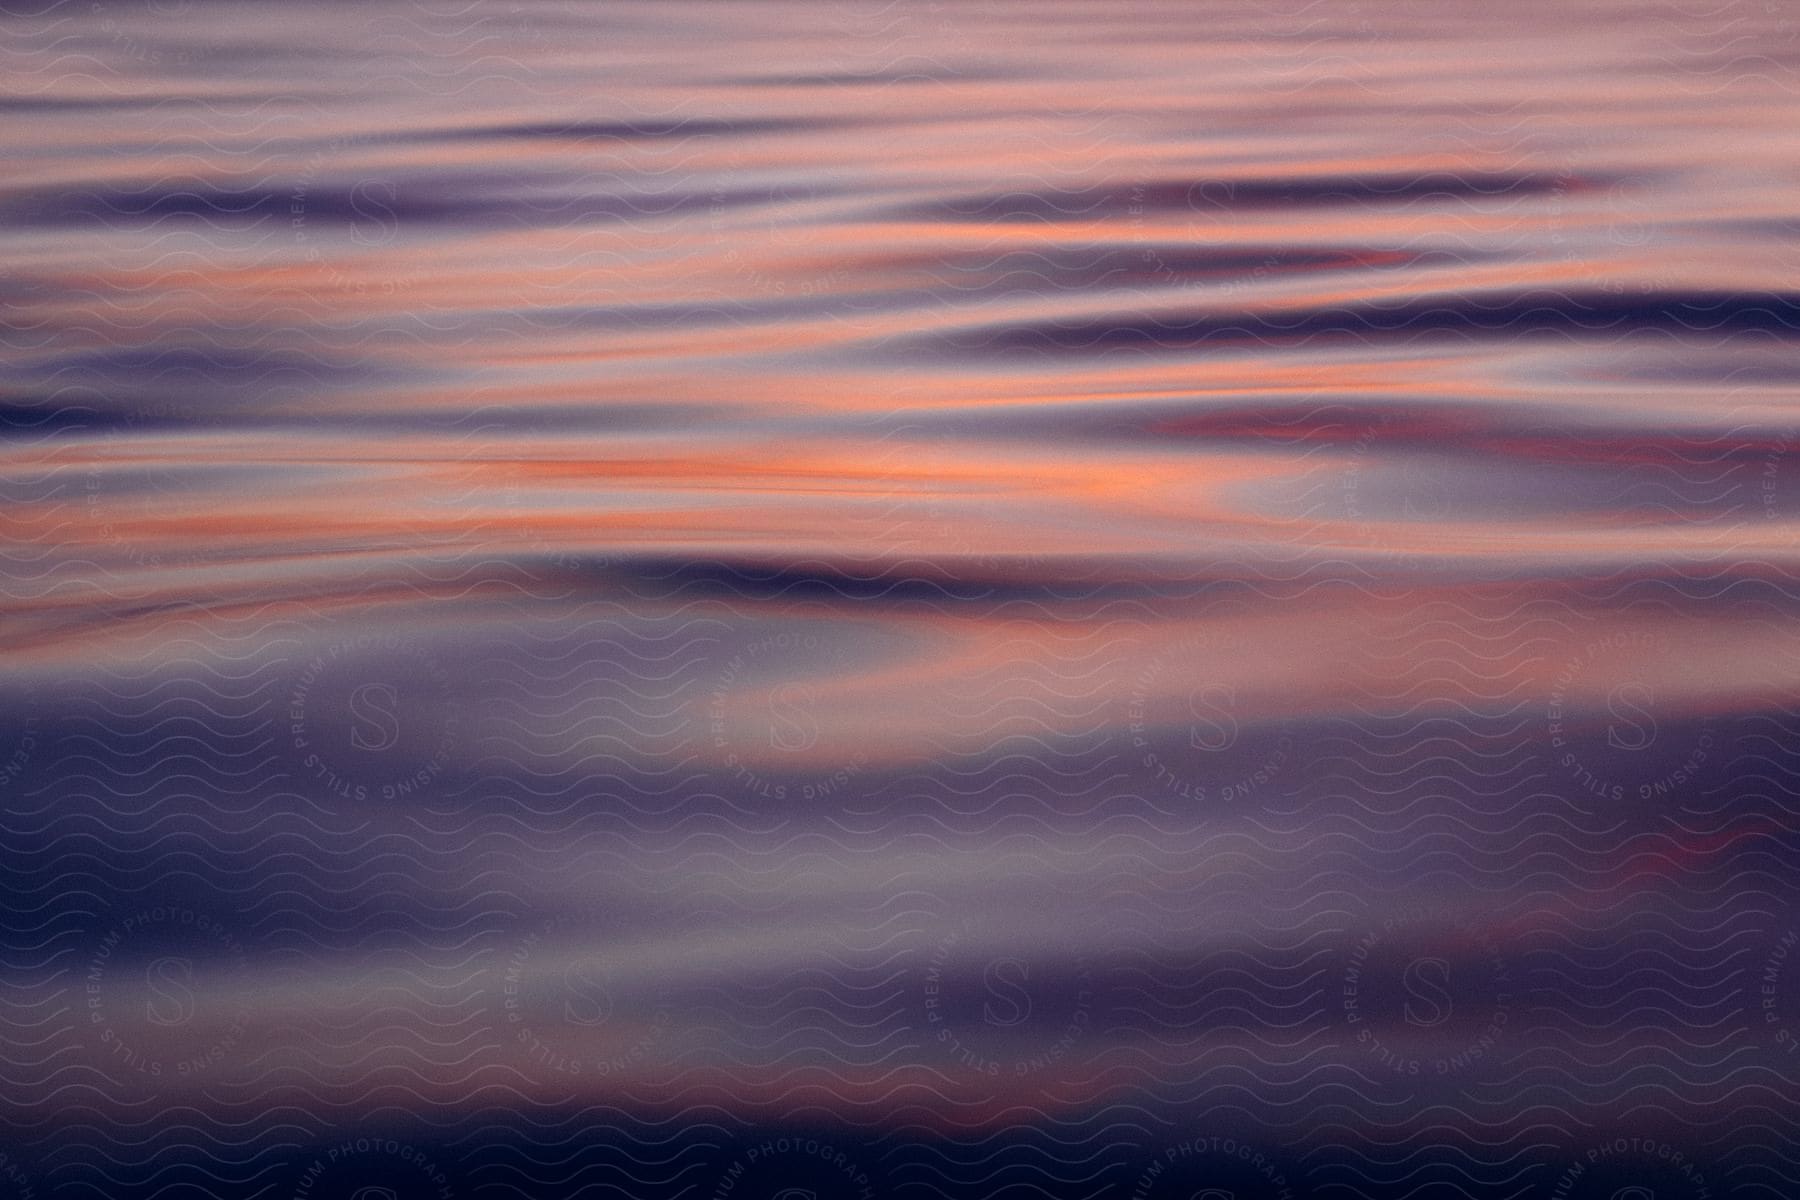 Ripples in water with a multicolored reflection at sunset